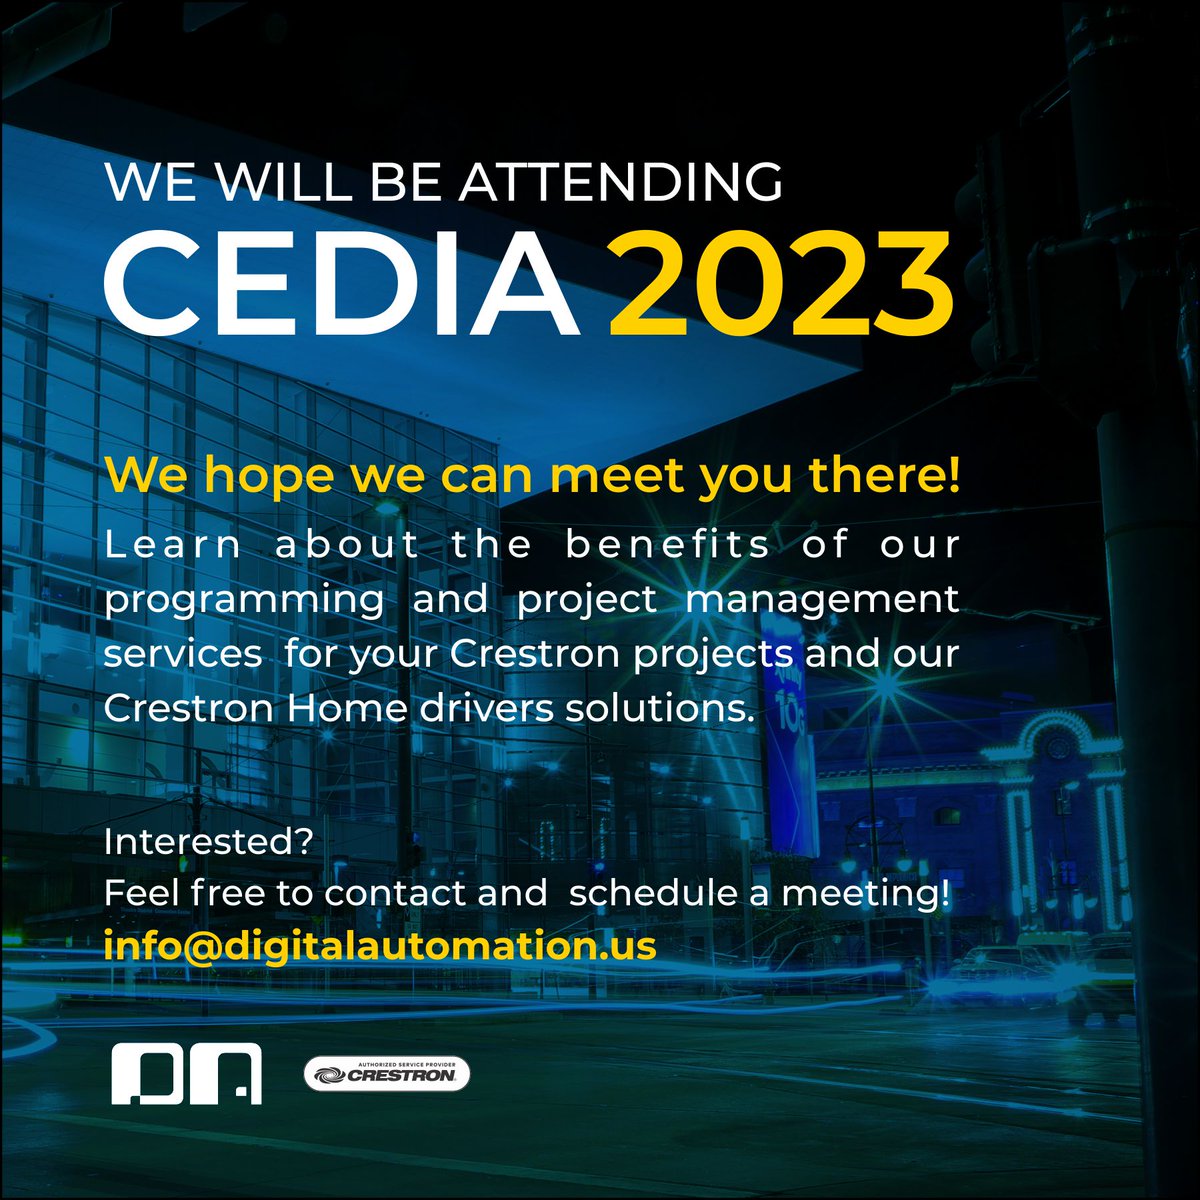 We will be attending #CEDIA2023!
Let us know about your @Crestron projects, we will be happy to show you how our experience and service can benefit them. Want to know more? 
Feel free to contact us and we can schedule a meeting! 👉 info@digitalautomation.us